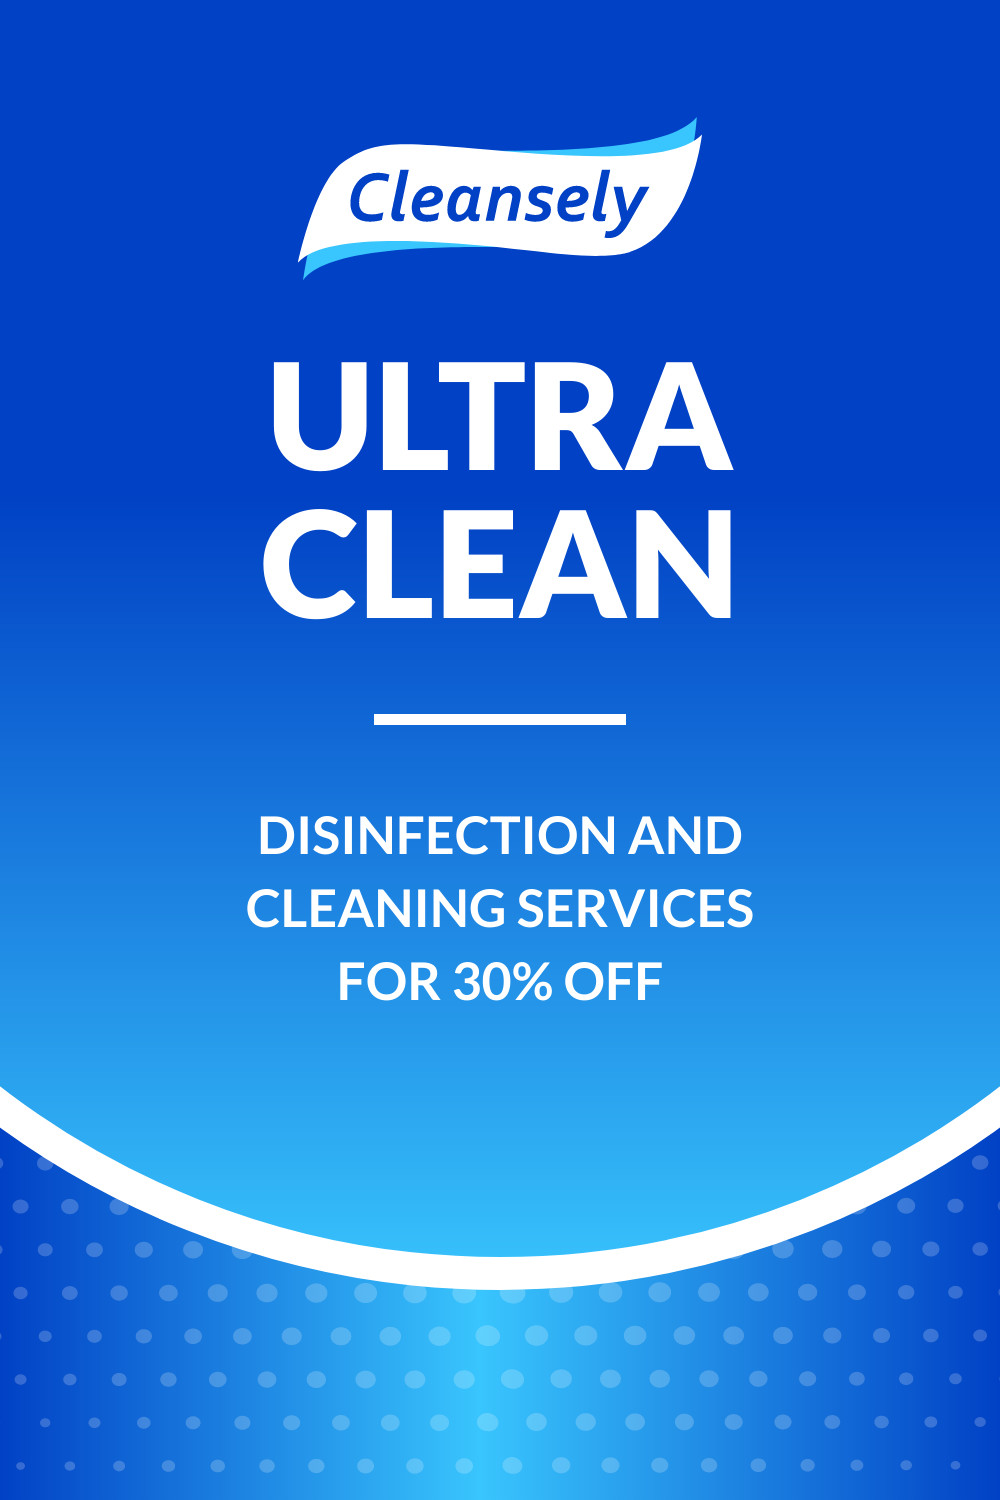 Ultra Clean Disinfection Services Inline Rectangle 300x250